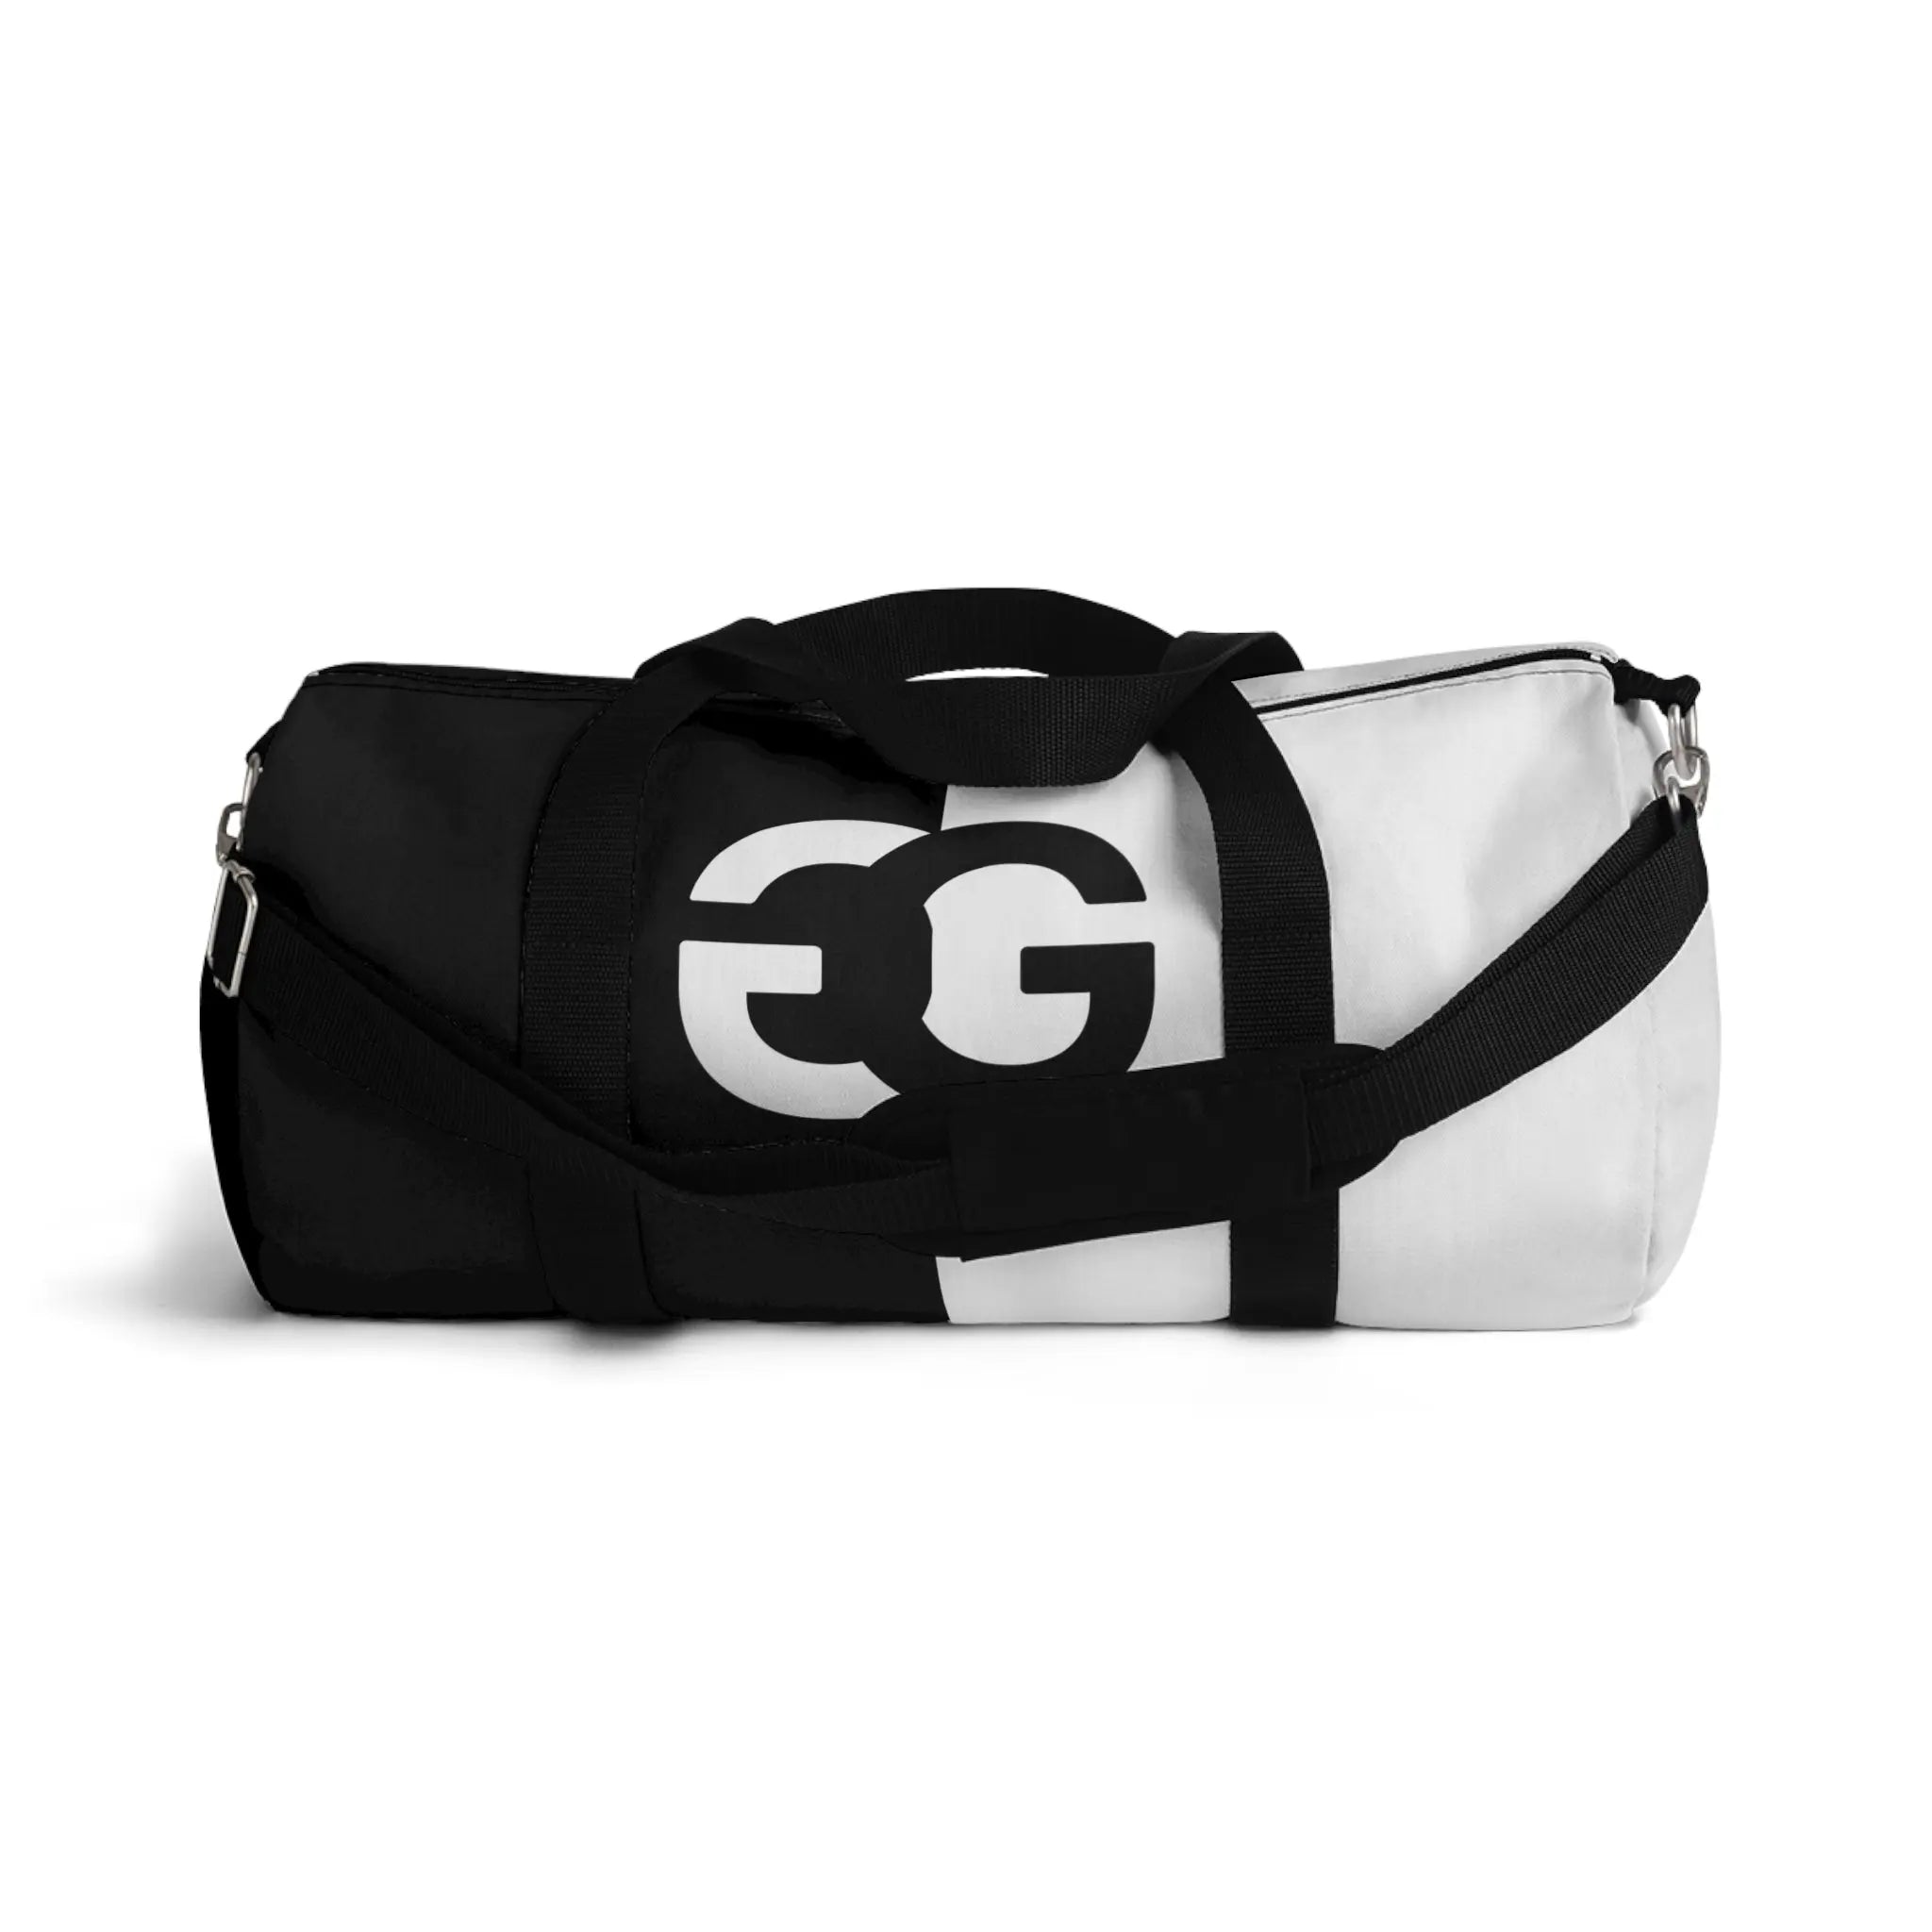  G is for Groove (Black and White) Duffel Bag Bags